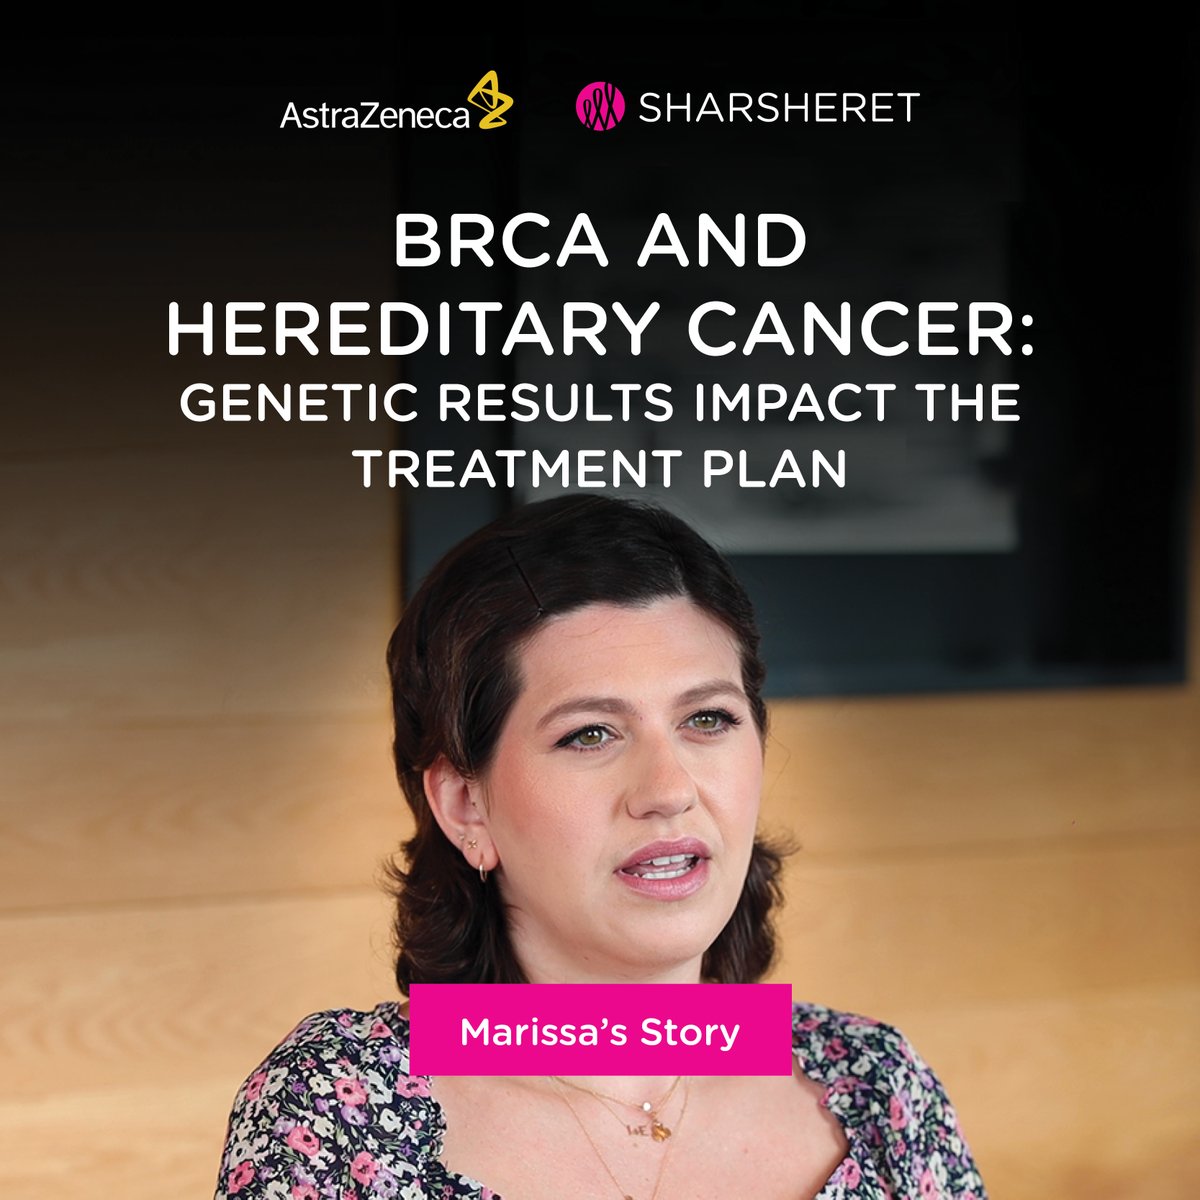 Genetic results impact your treatment plan. Learn how Marissa's positive BRCA1 test impacted her breast cancer diagnosis. Watch Marissa's story: youtube.com/watch?v=5-m_Xp… The @sharsheretofficial BRCA Hereditary Cancer video series is made possible w/ support from @Astrazeneca.